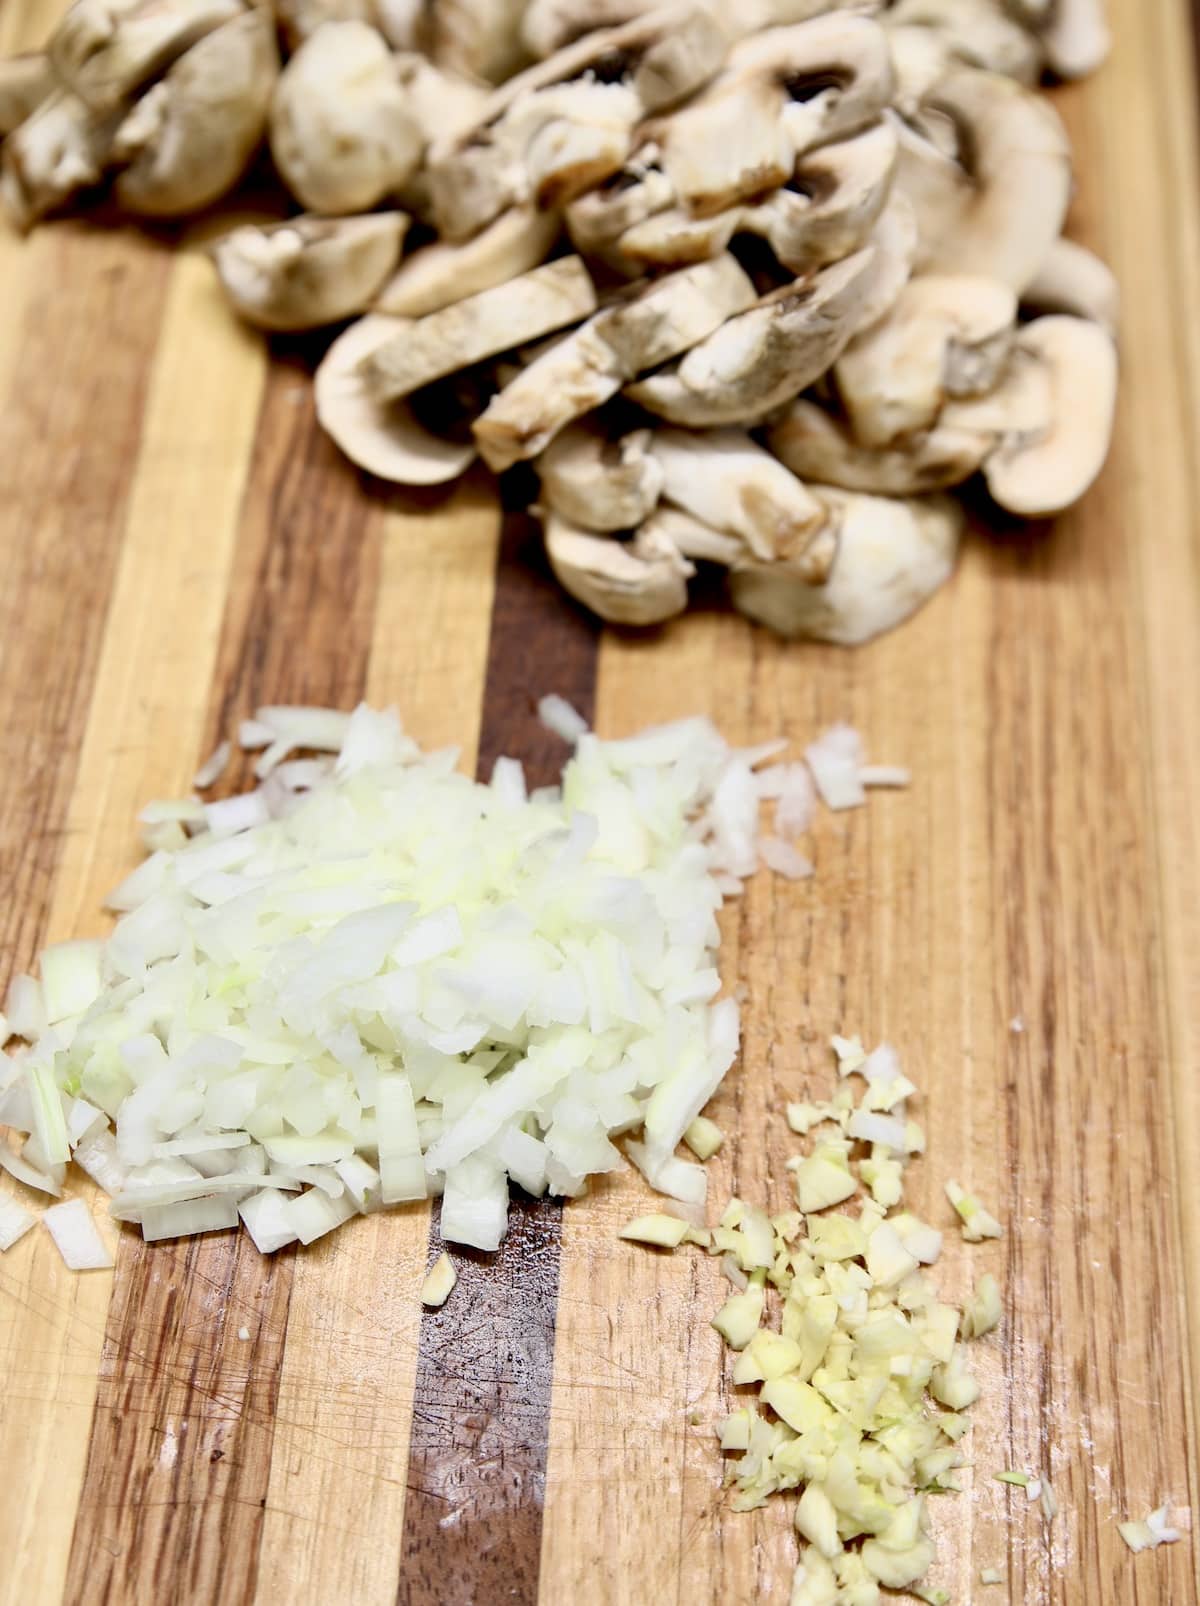 Diced onions and minced garlic on a cutting board with sliced mushrooms.